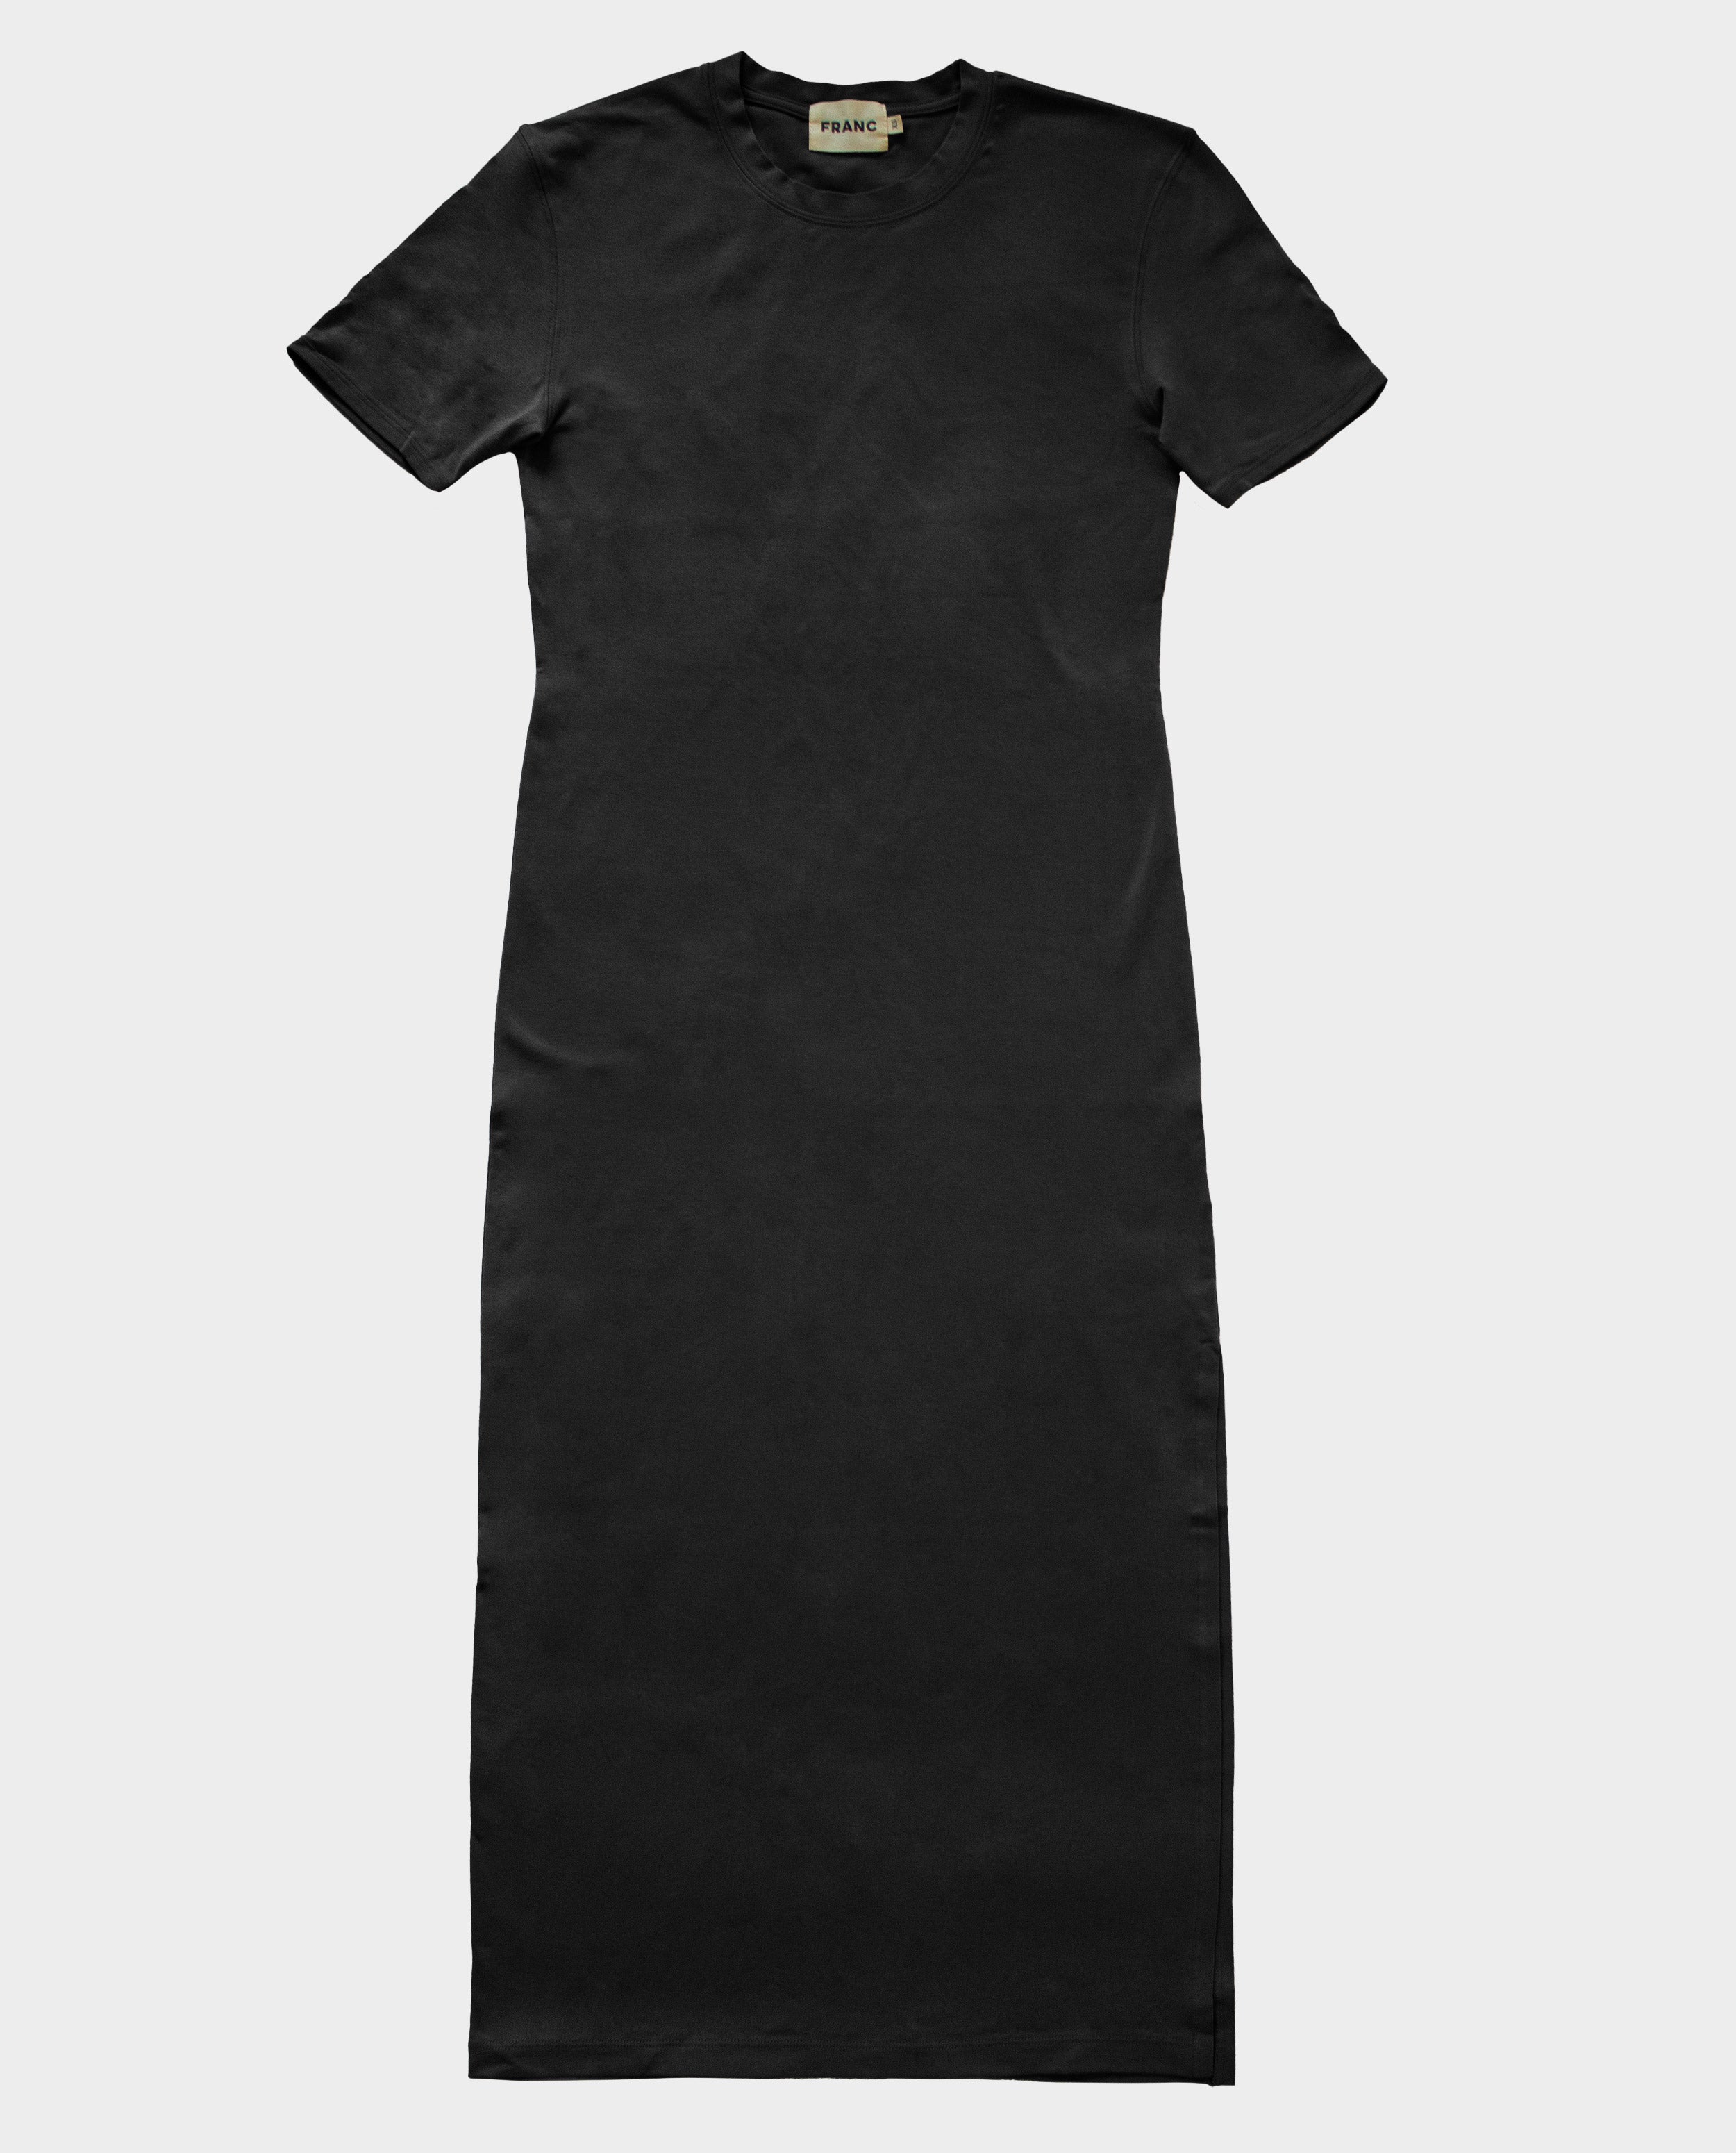 The Maxi T-Shirt Dress in Black | FRANC Sustainable Clothing